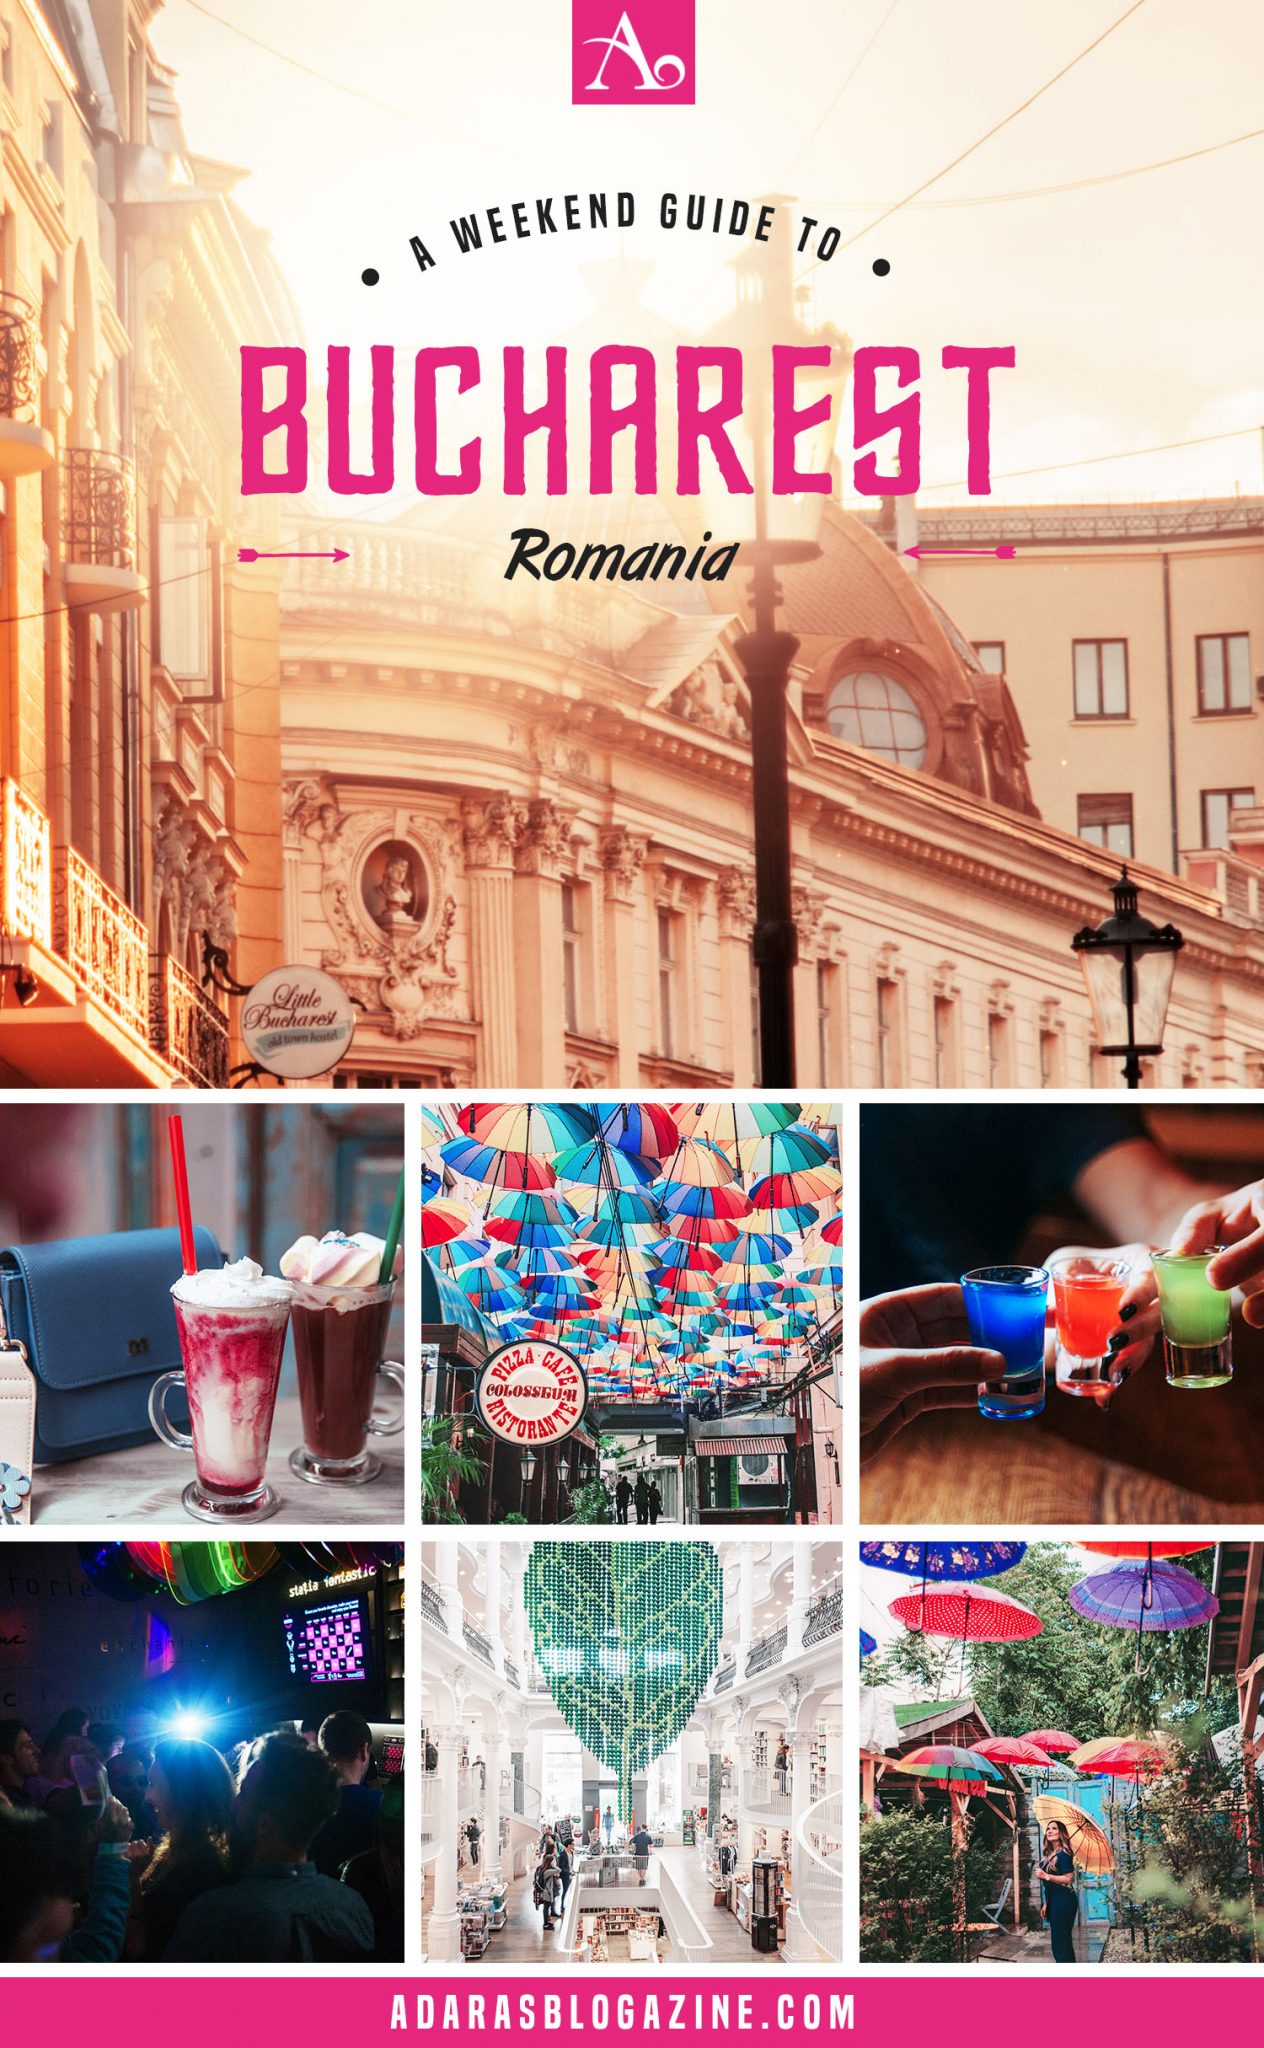 Experience Bucharest Travel Guide: What to see & What to do in Romania's Capital